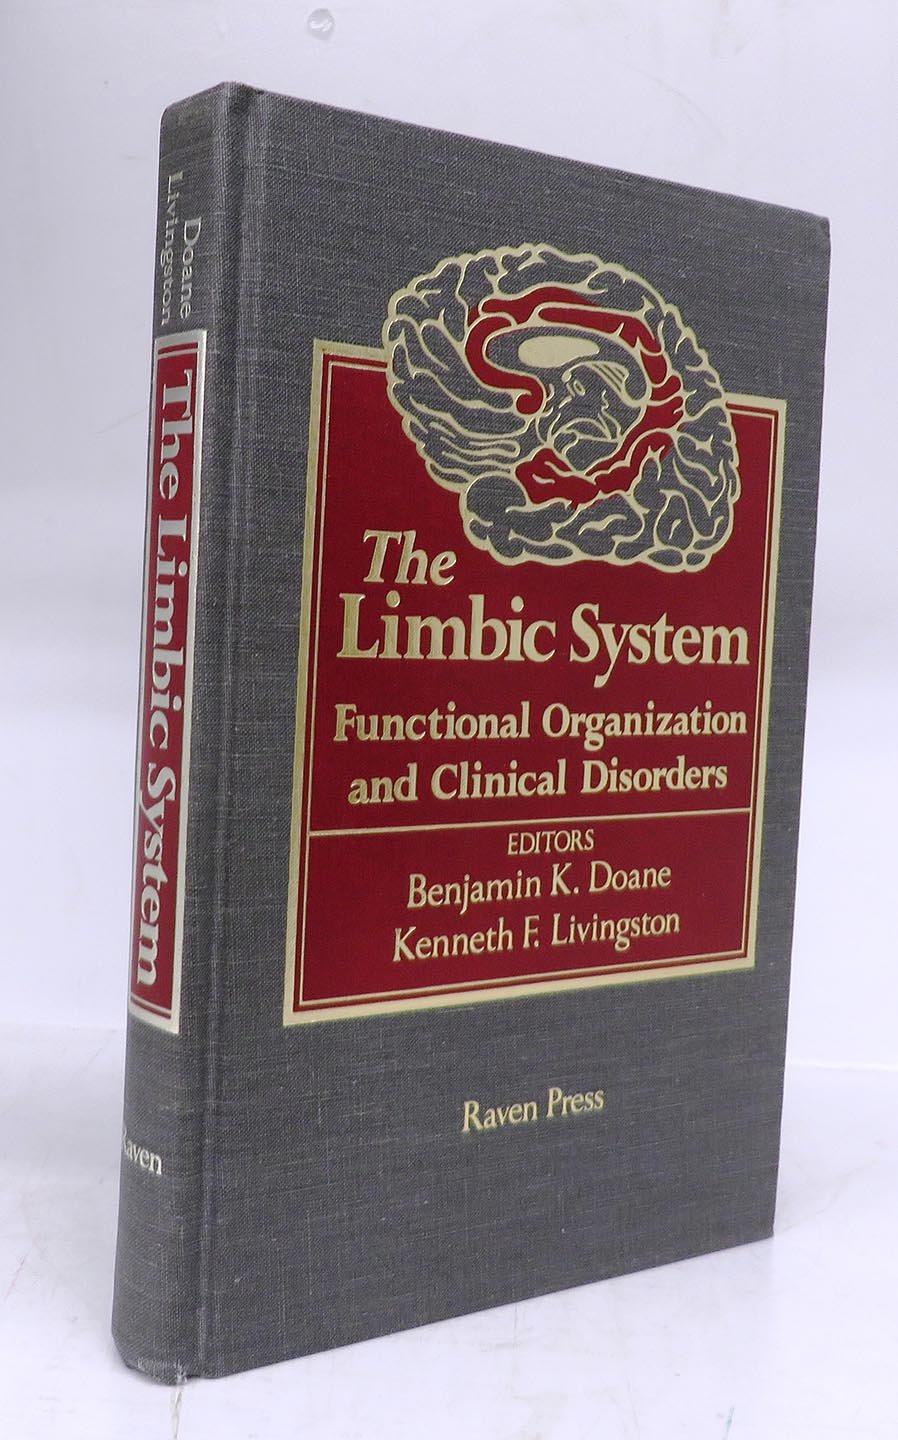 The Limbic System: Functional Organization and Clinical Disorders